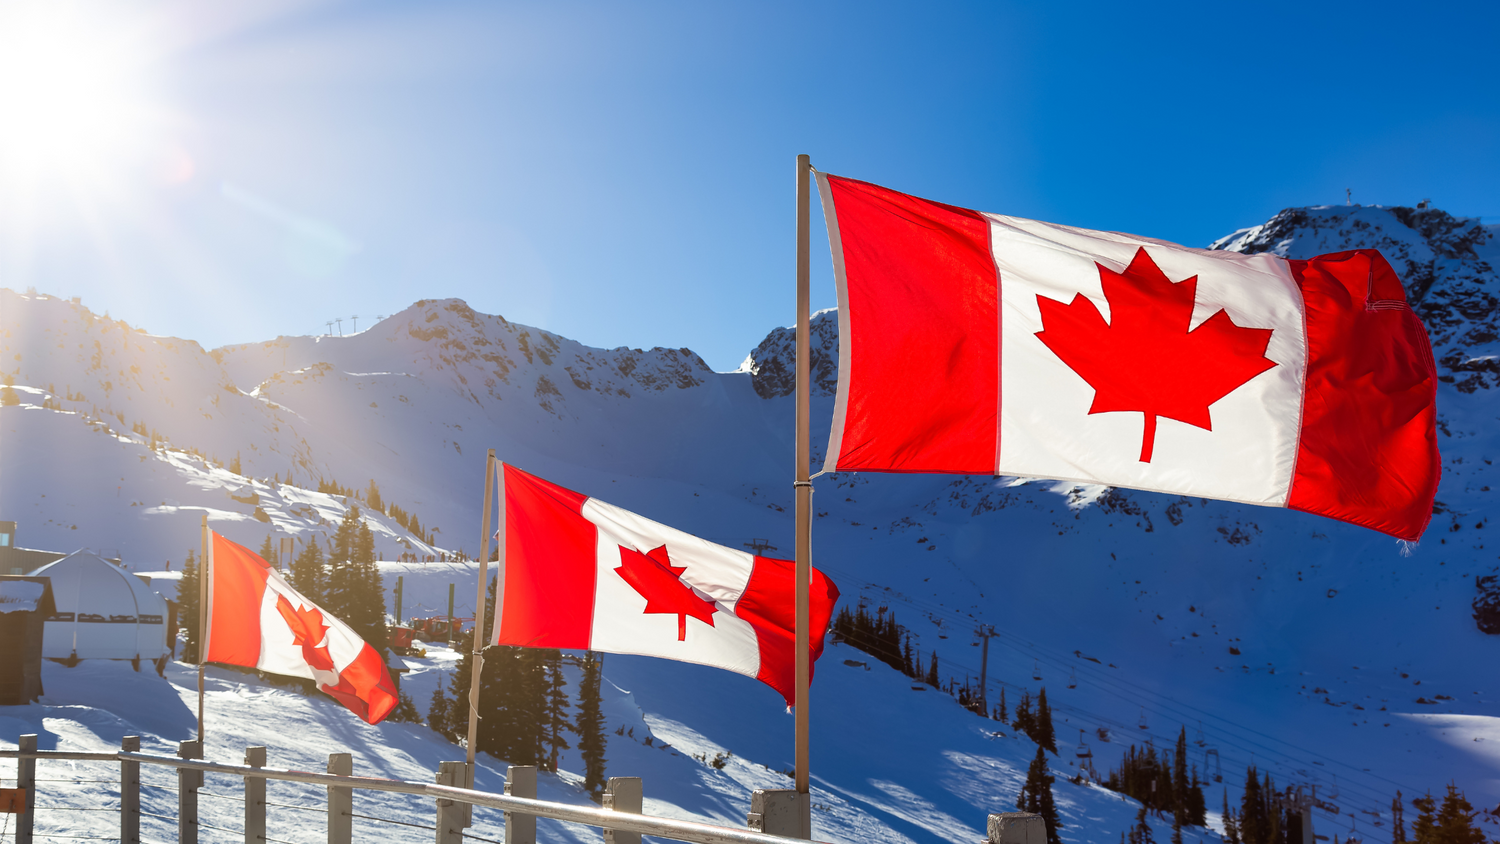 Farmers' Almanac Winter 2024 Canada Forecast: Embrace the Return of Classic Canadian Winters with HeatTrak Snow & Ice Melting Mats